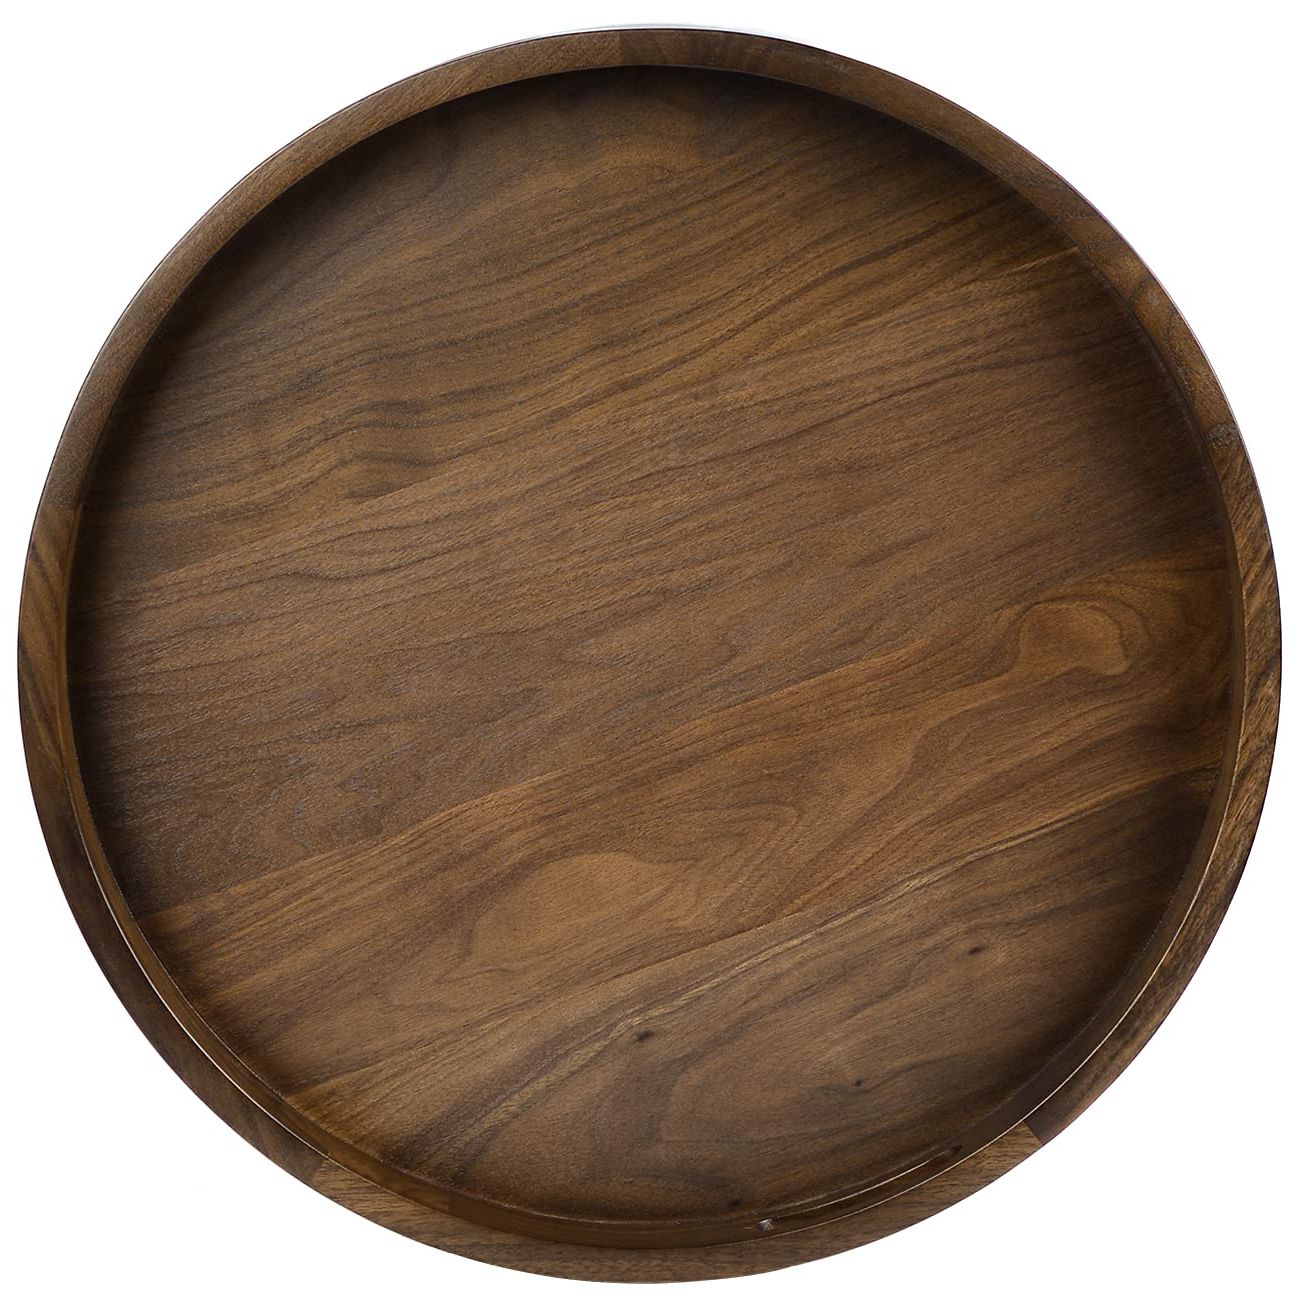 Walnut Round Ottomans Within Trendy Amazon: Kingcraft 24 X 24 Inches Large Round Ottoman Table Tray Wooden  Solid Circle Serving Tray With Handle Black Walnut Platter Decorative Tray  For Oversized Ottoman Home Breakfast In Bed Tea Coffee : (View 9 of 10)